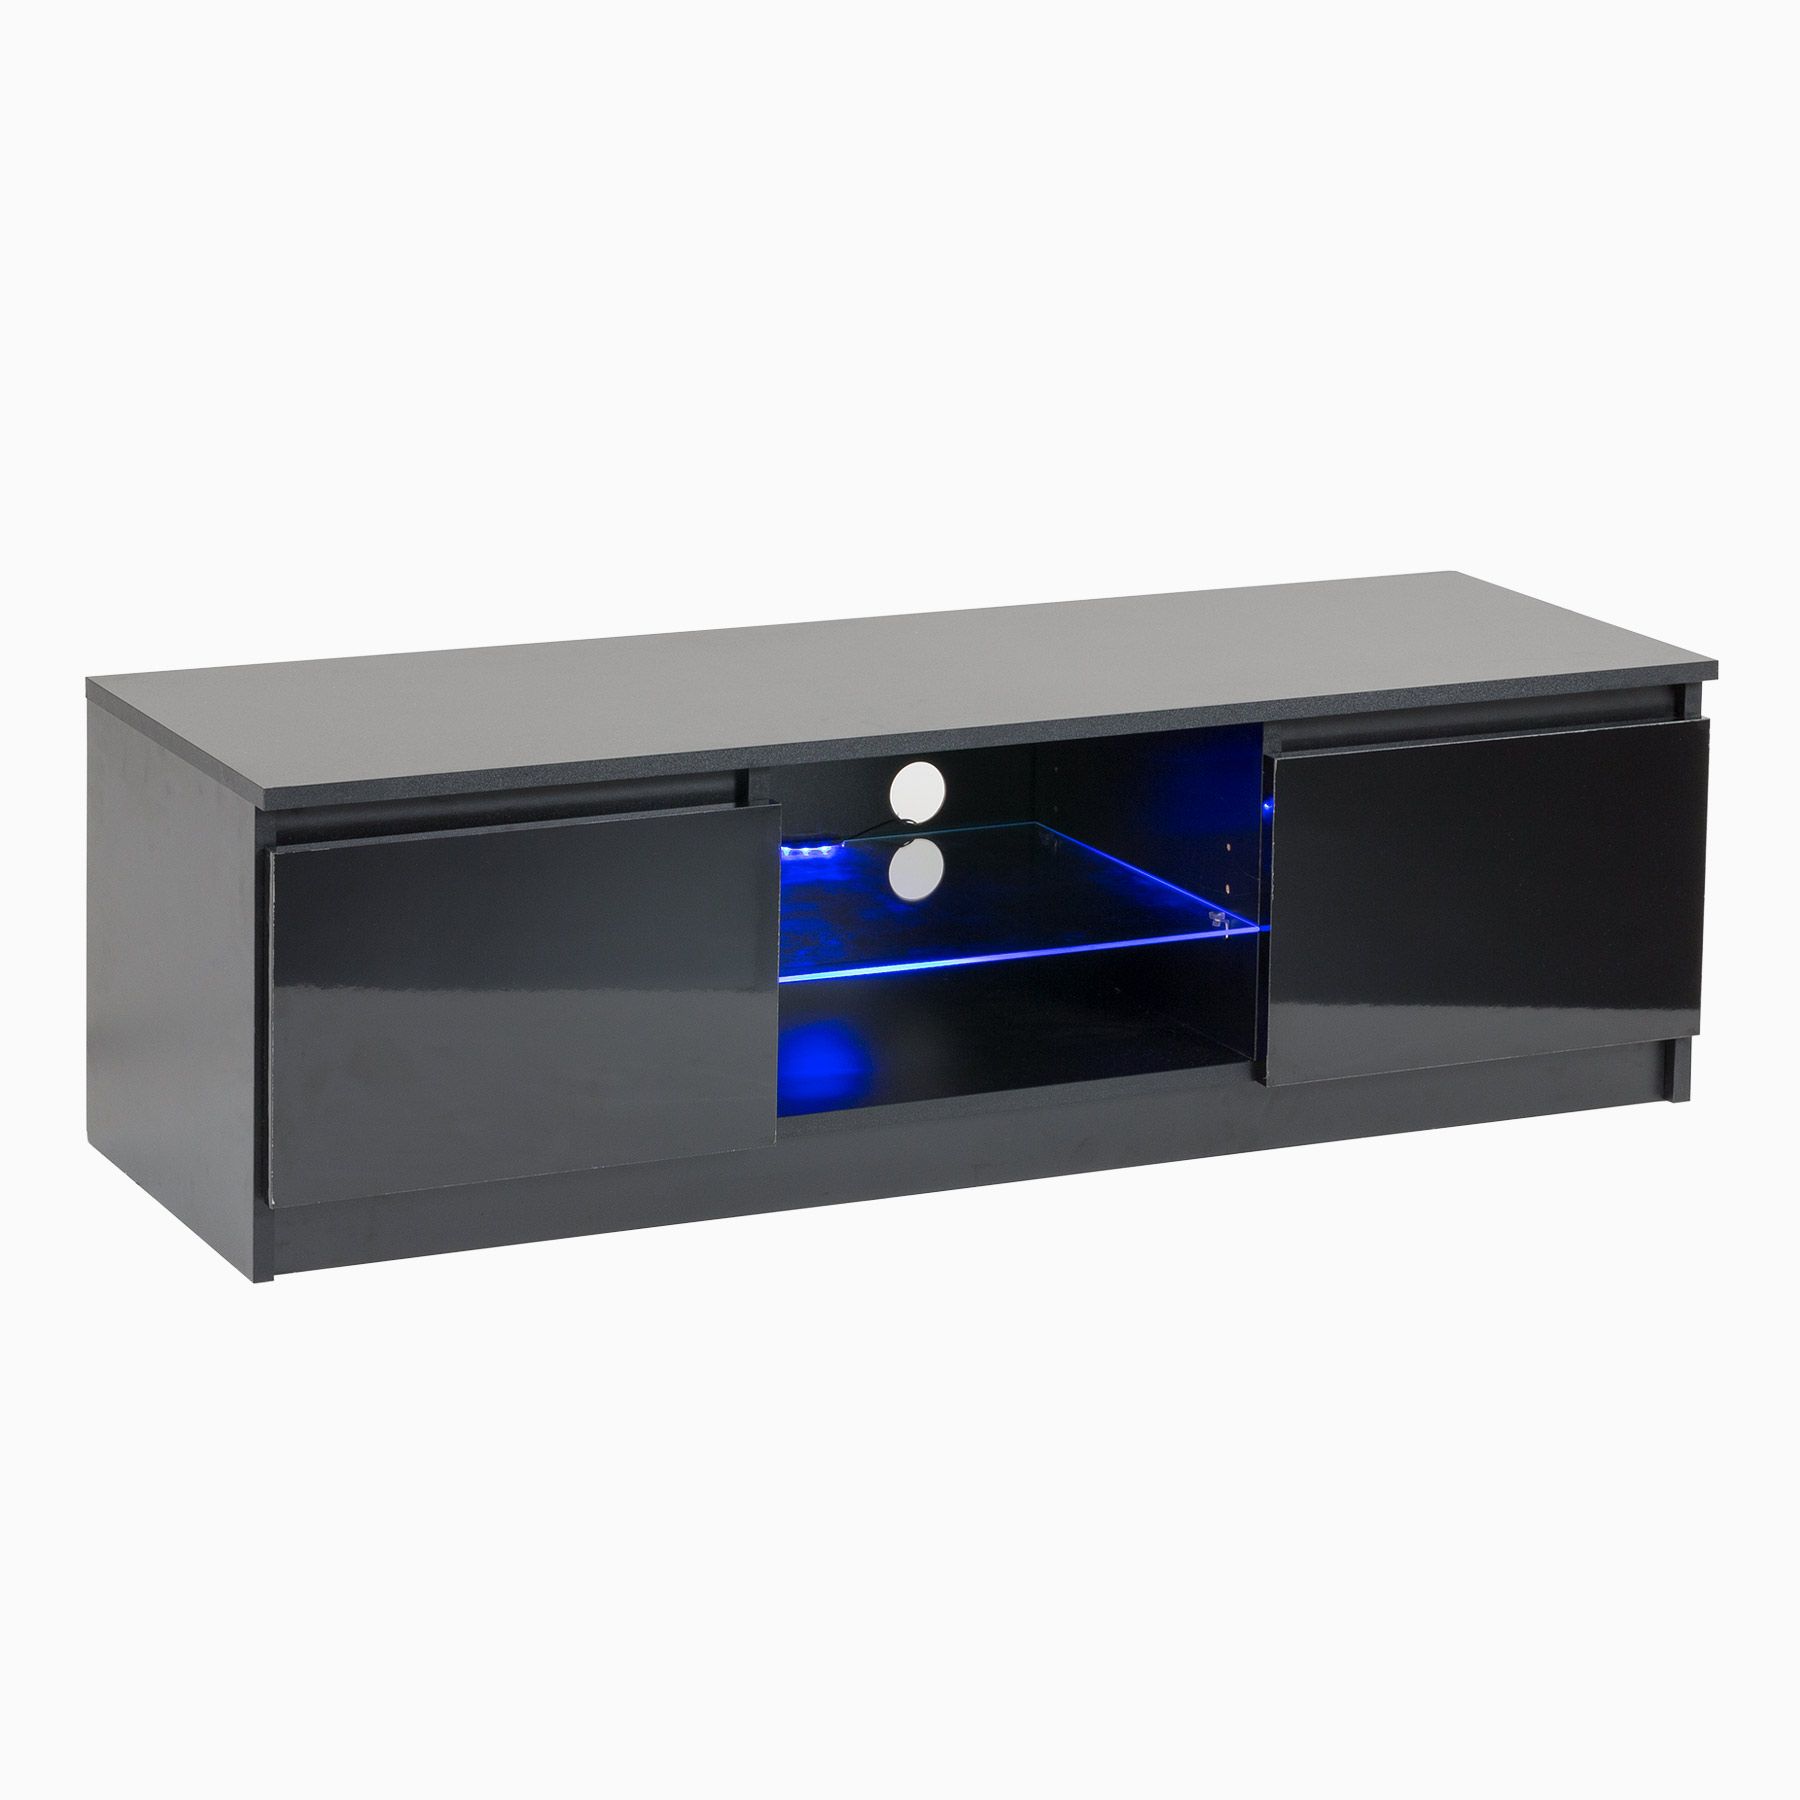 High Black Gloss Tv Cabinet • Patio Ideas In Black Gloss Tv Cabinets (View 10 of 15)